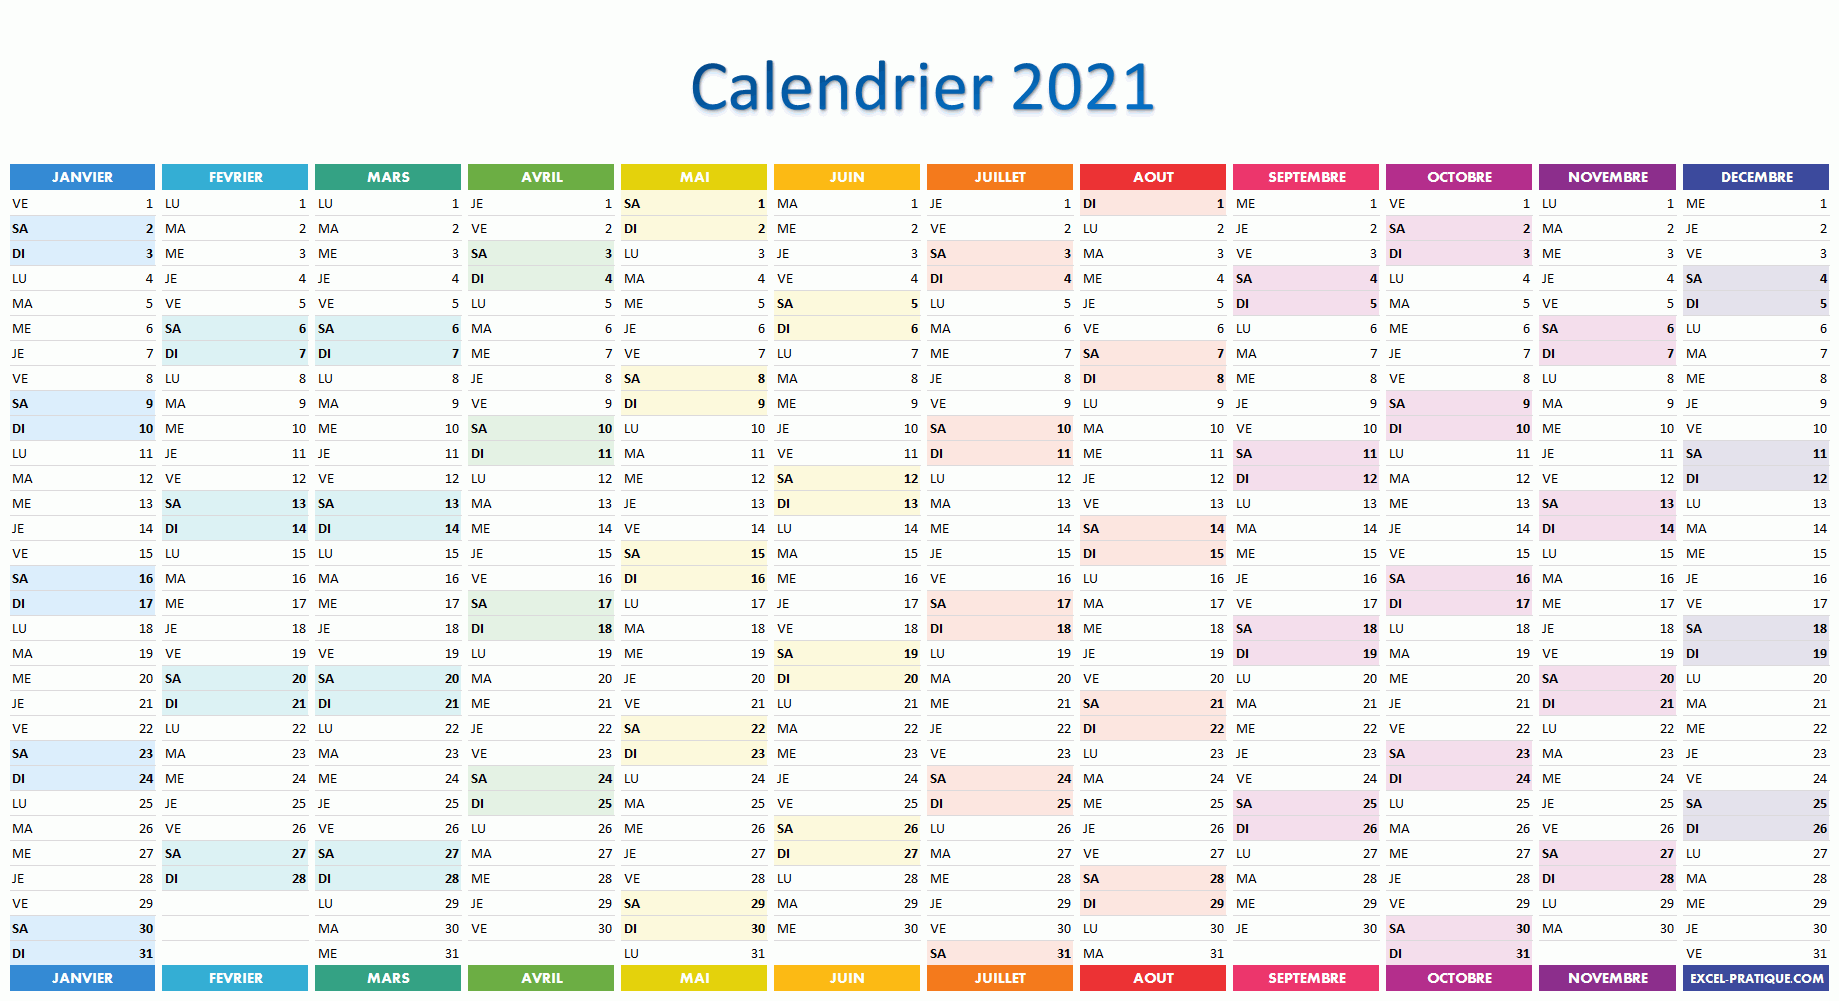 Calendrier 2021 Image Calendrier 2021 simple